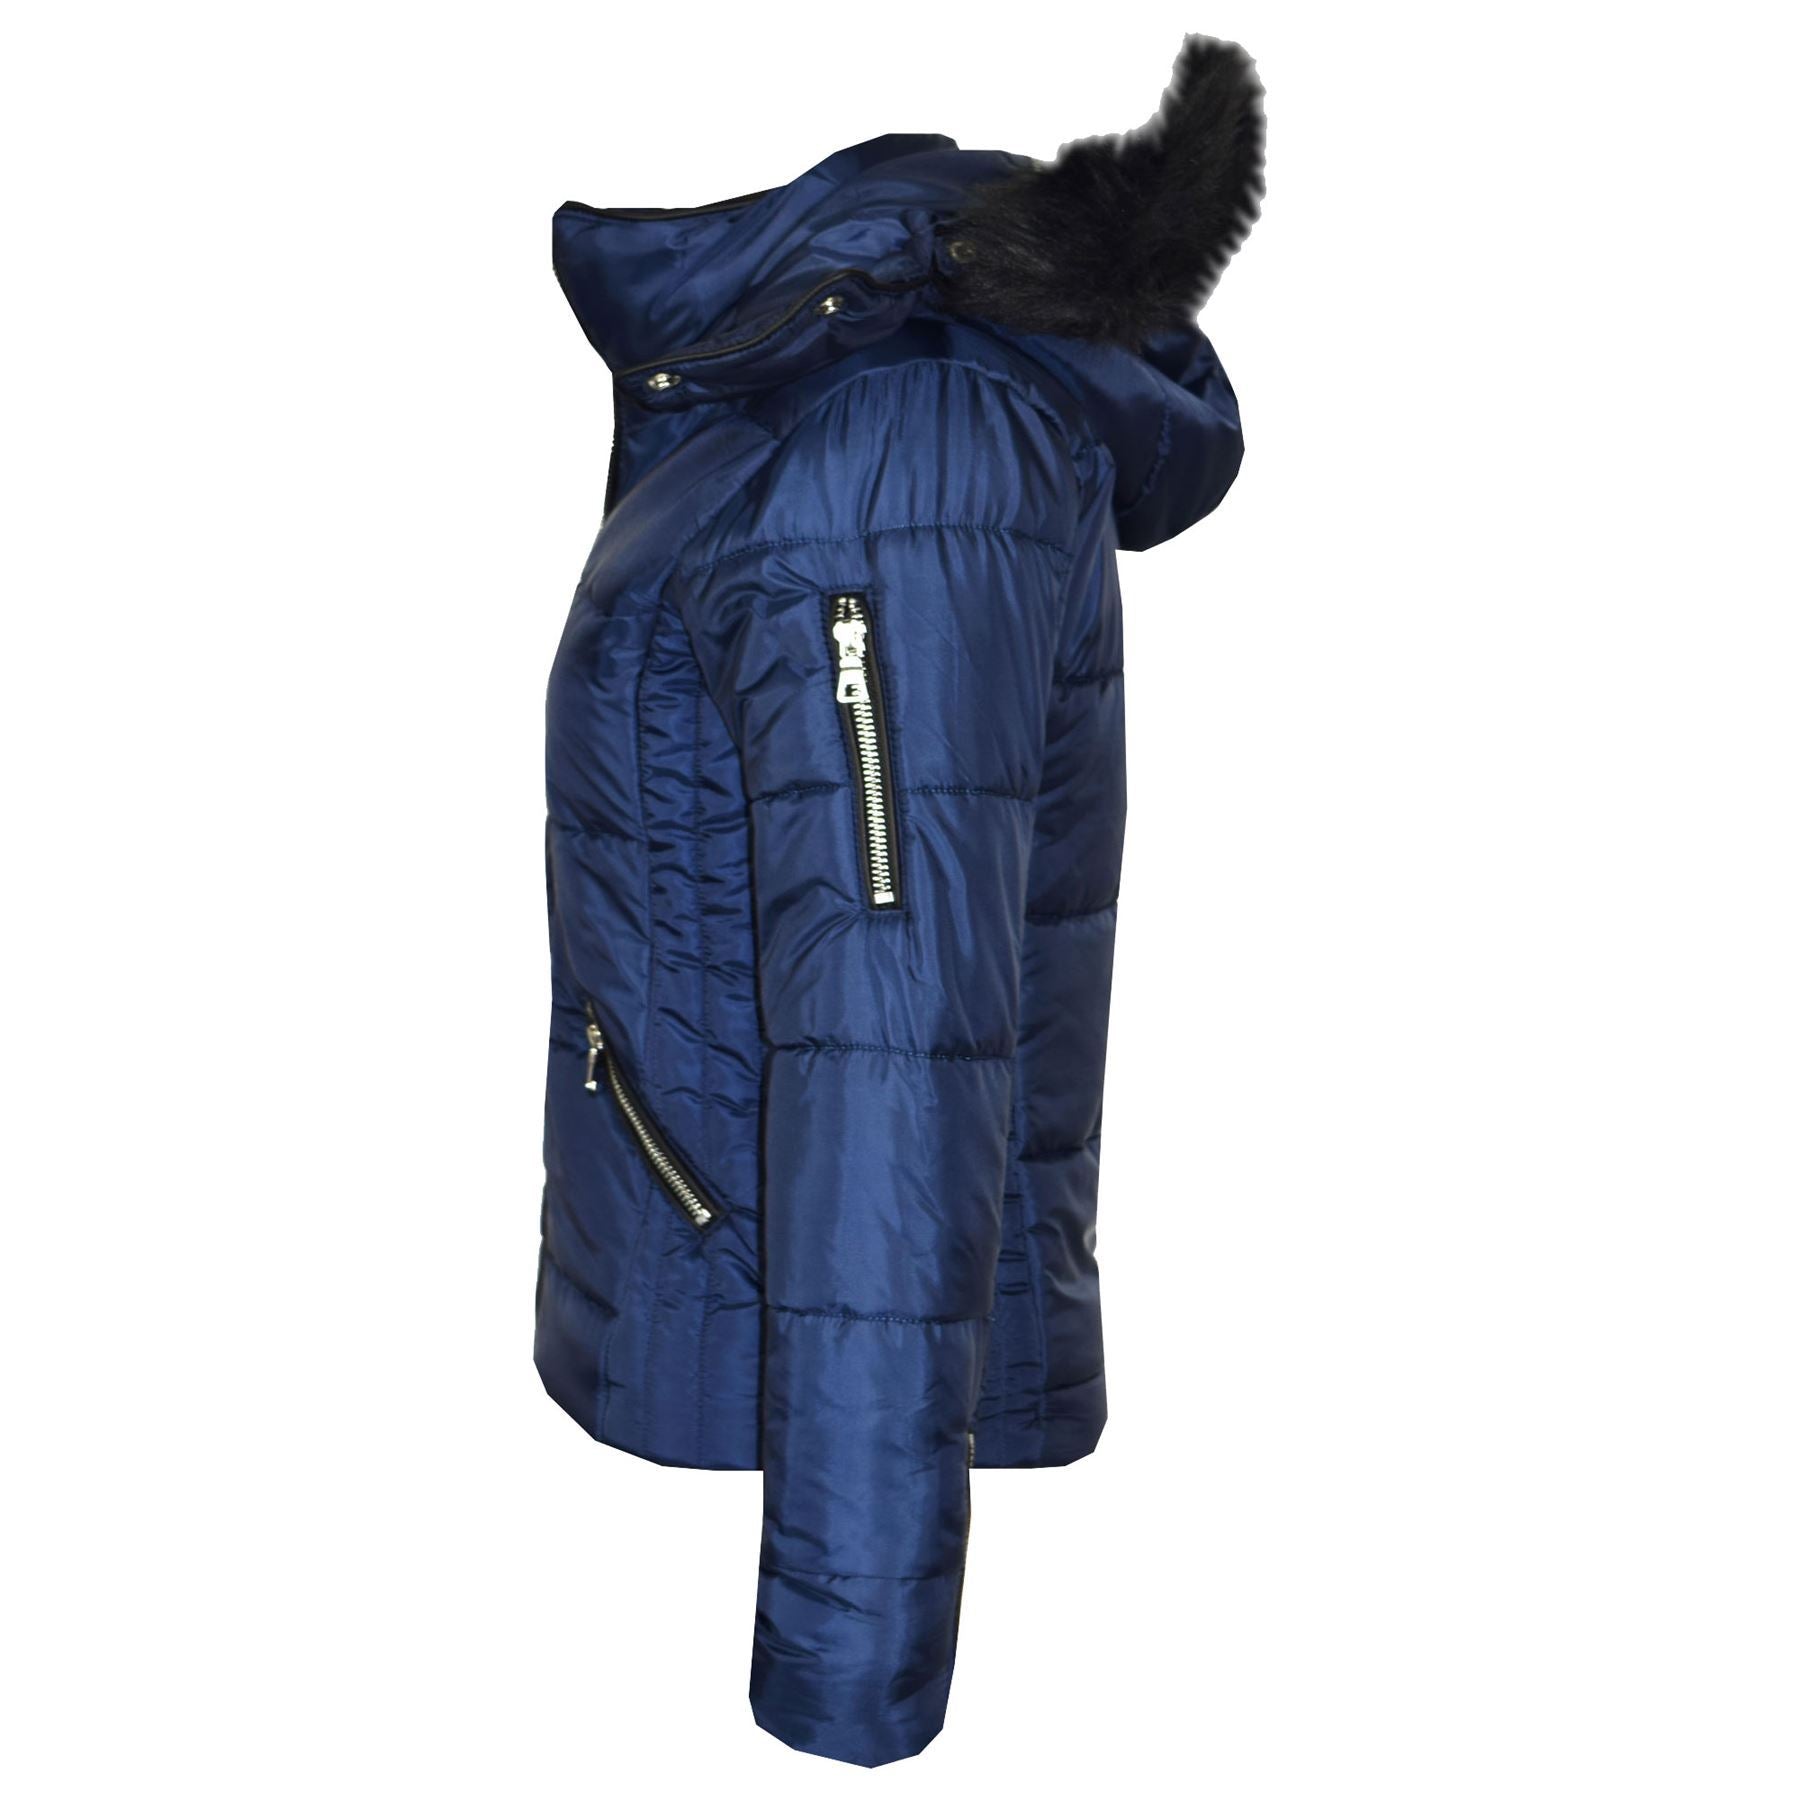 Girls Quilted Puffer Navy Faux Fur Jacket